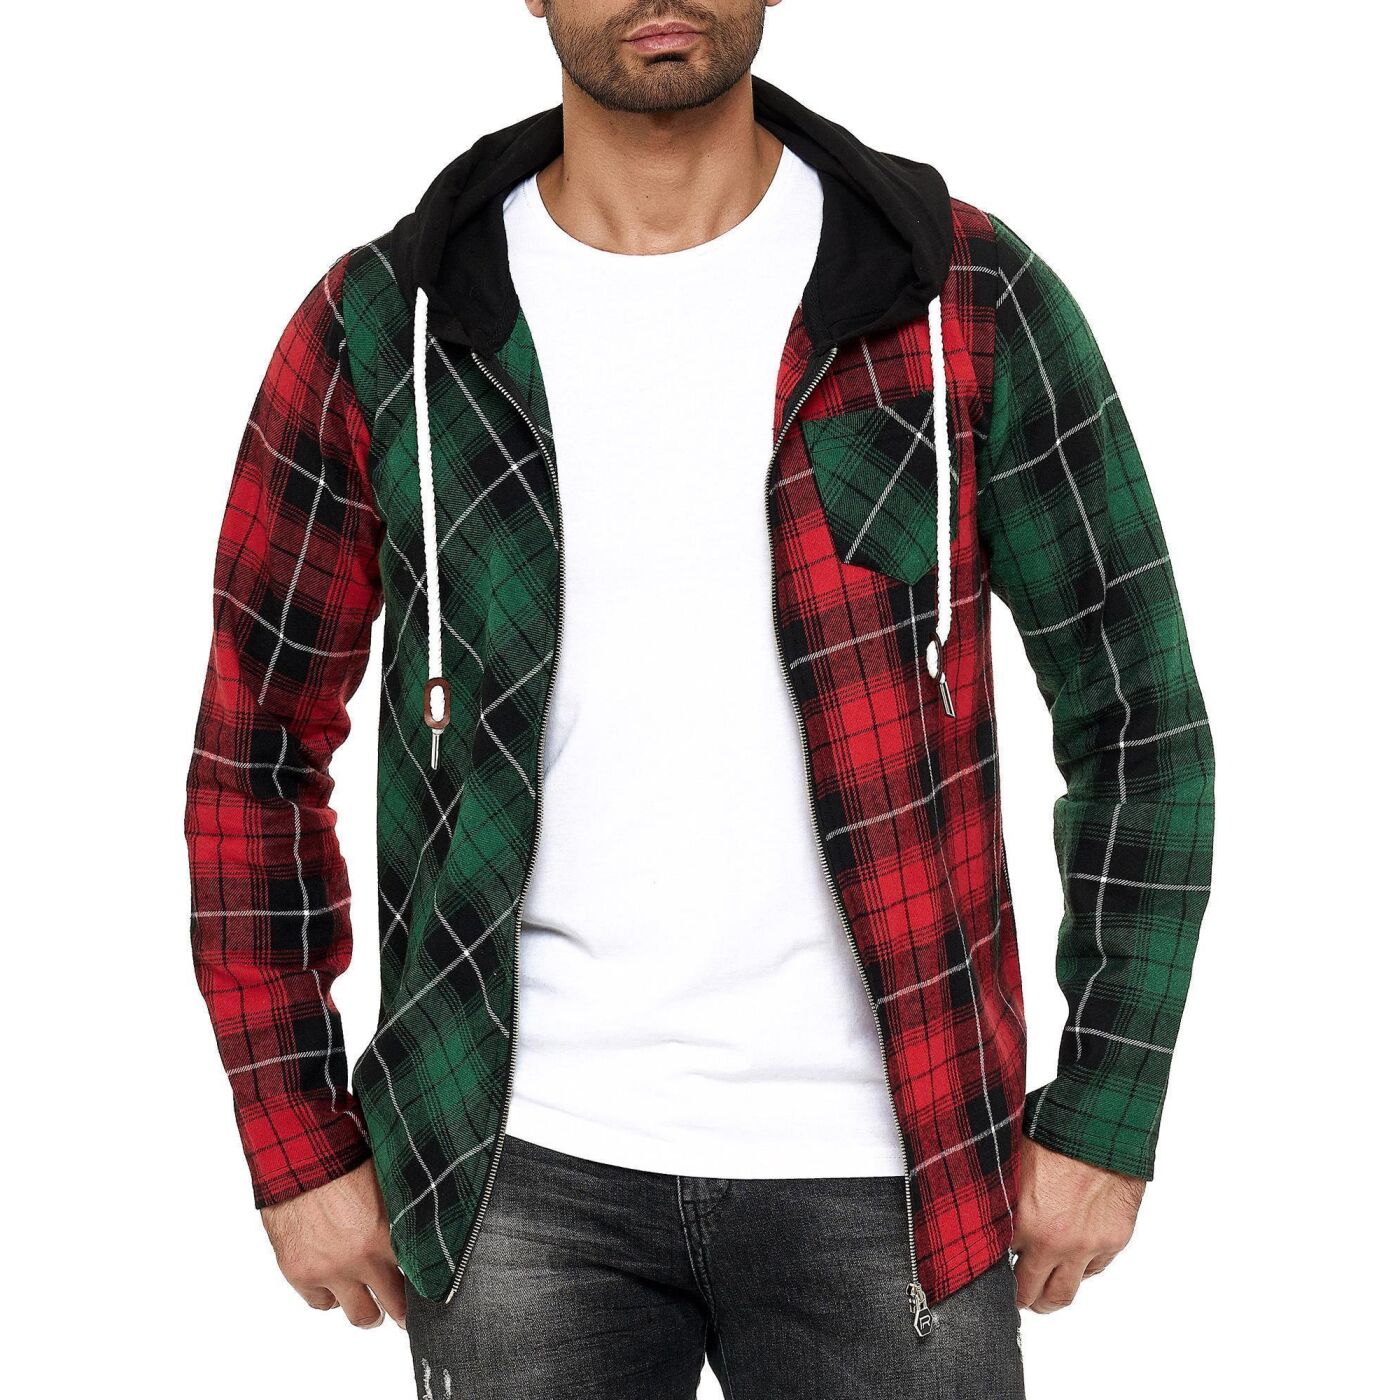 € hooded Jacket Sweat checkere, Bridge Pullover with mens 44,90 Red Sweatshirt